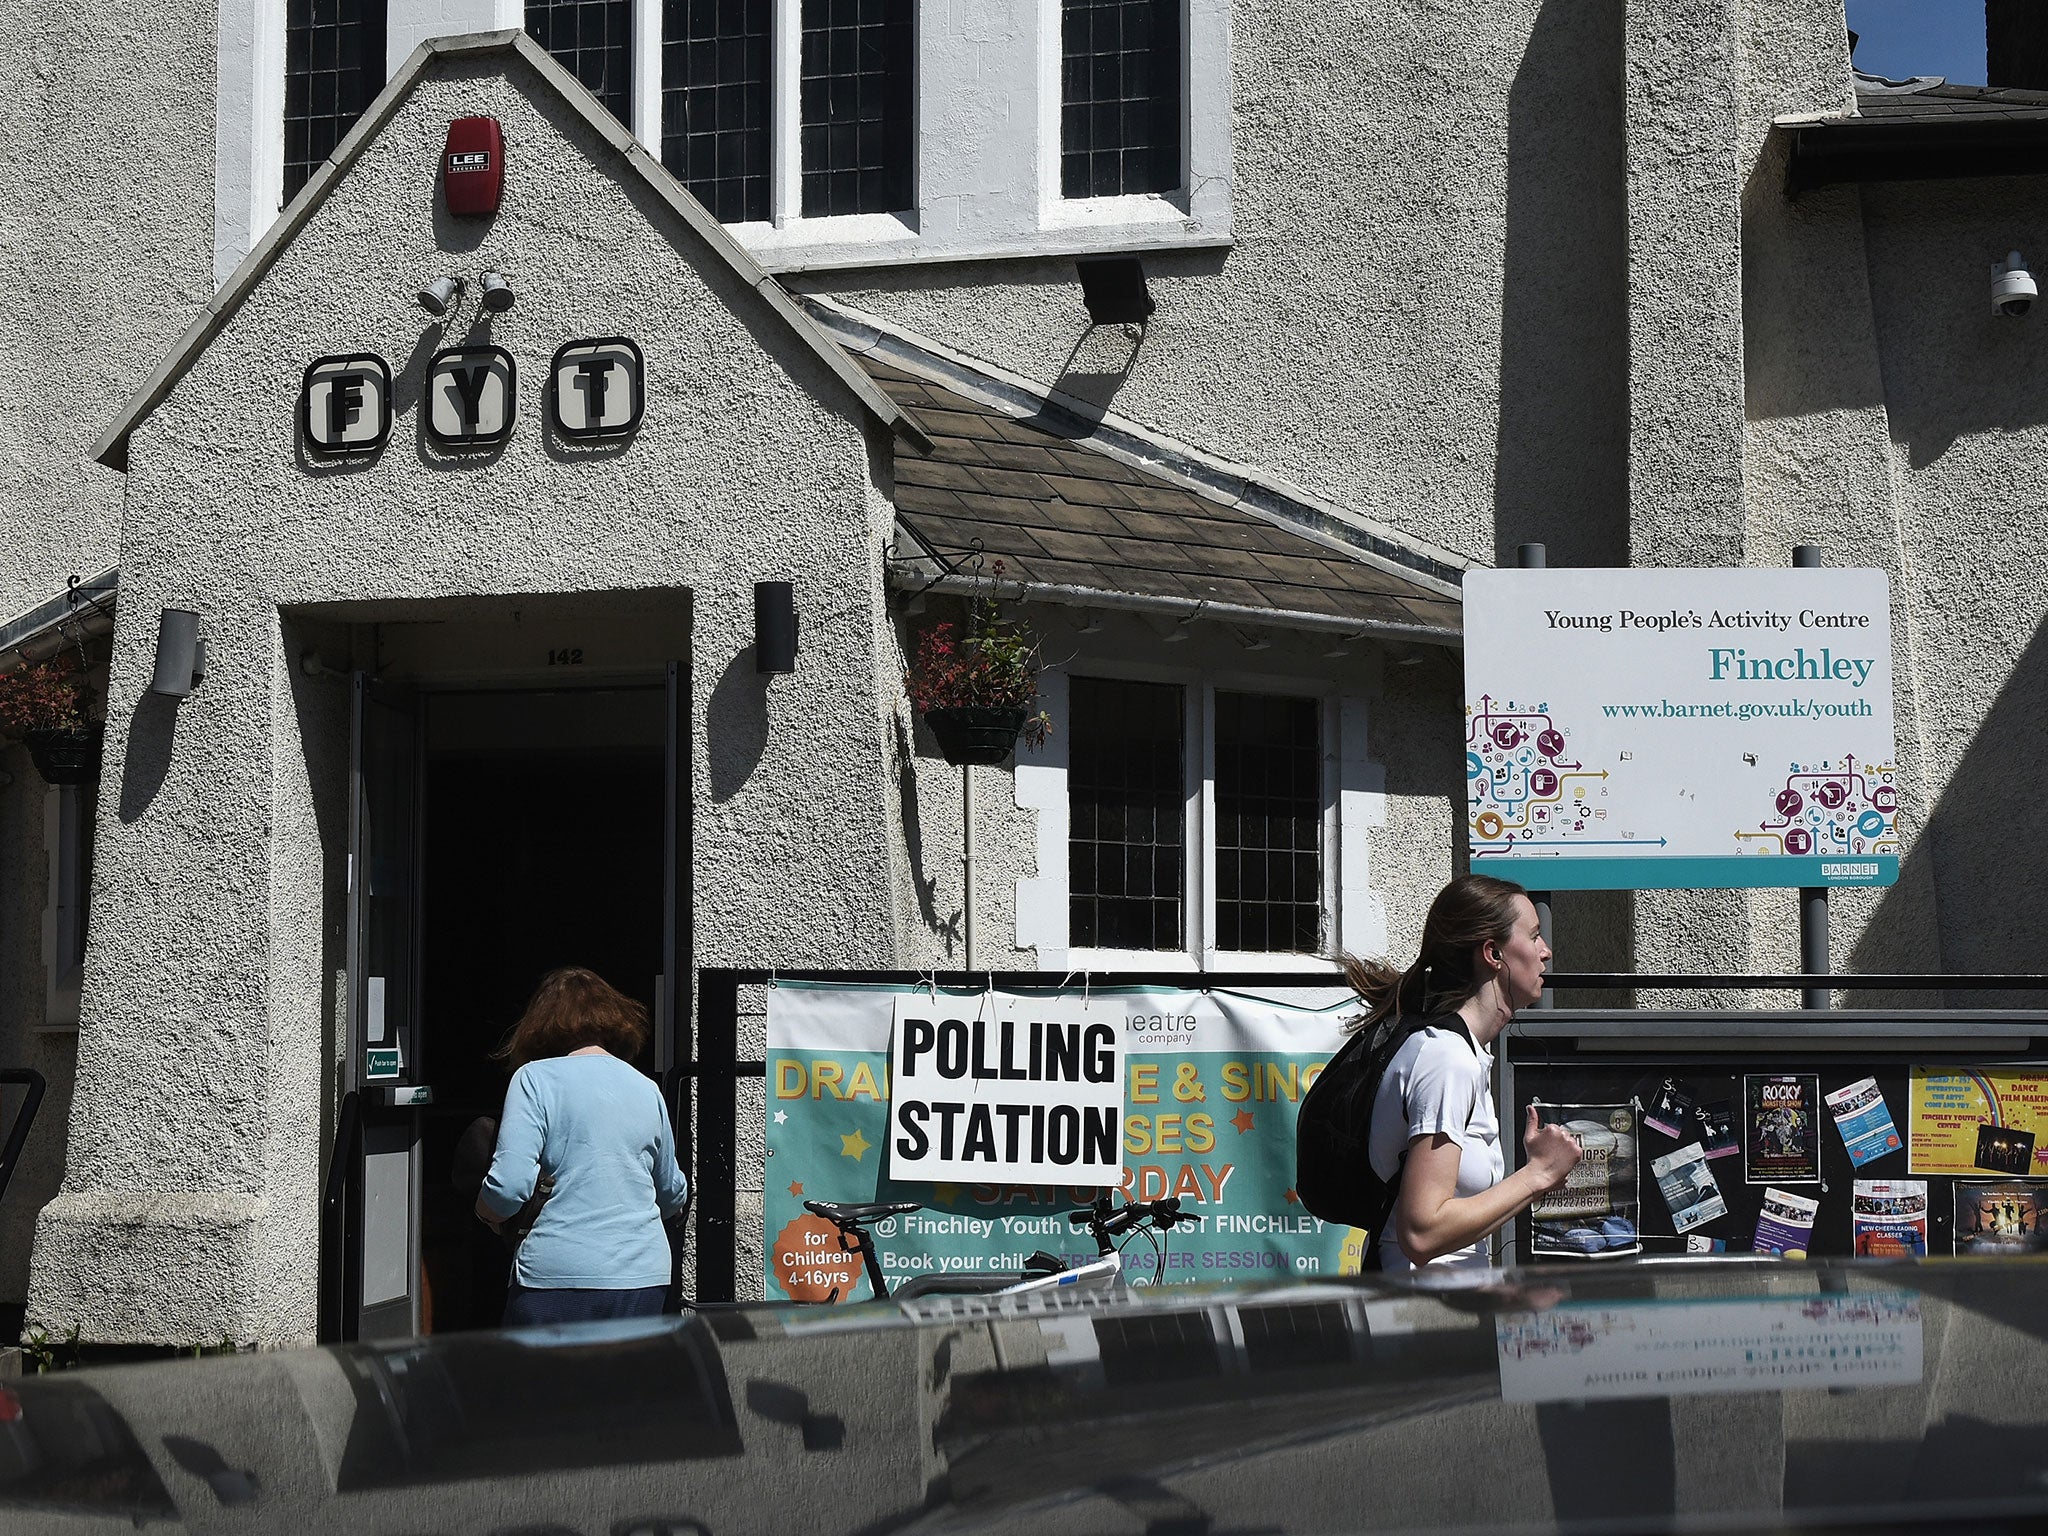 Voters in the borough of Barnet encountered problems when they were turned away from polling stations given incomplete electoral lists